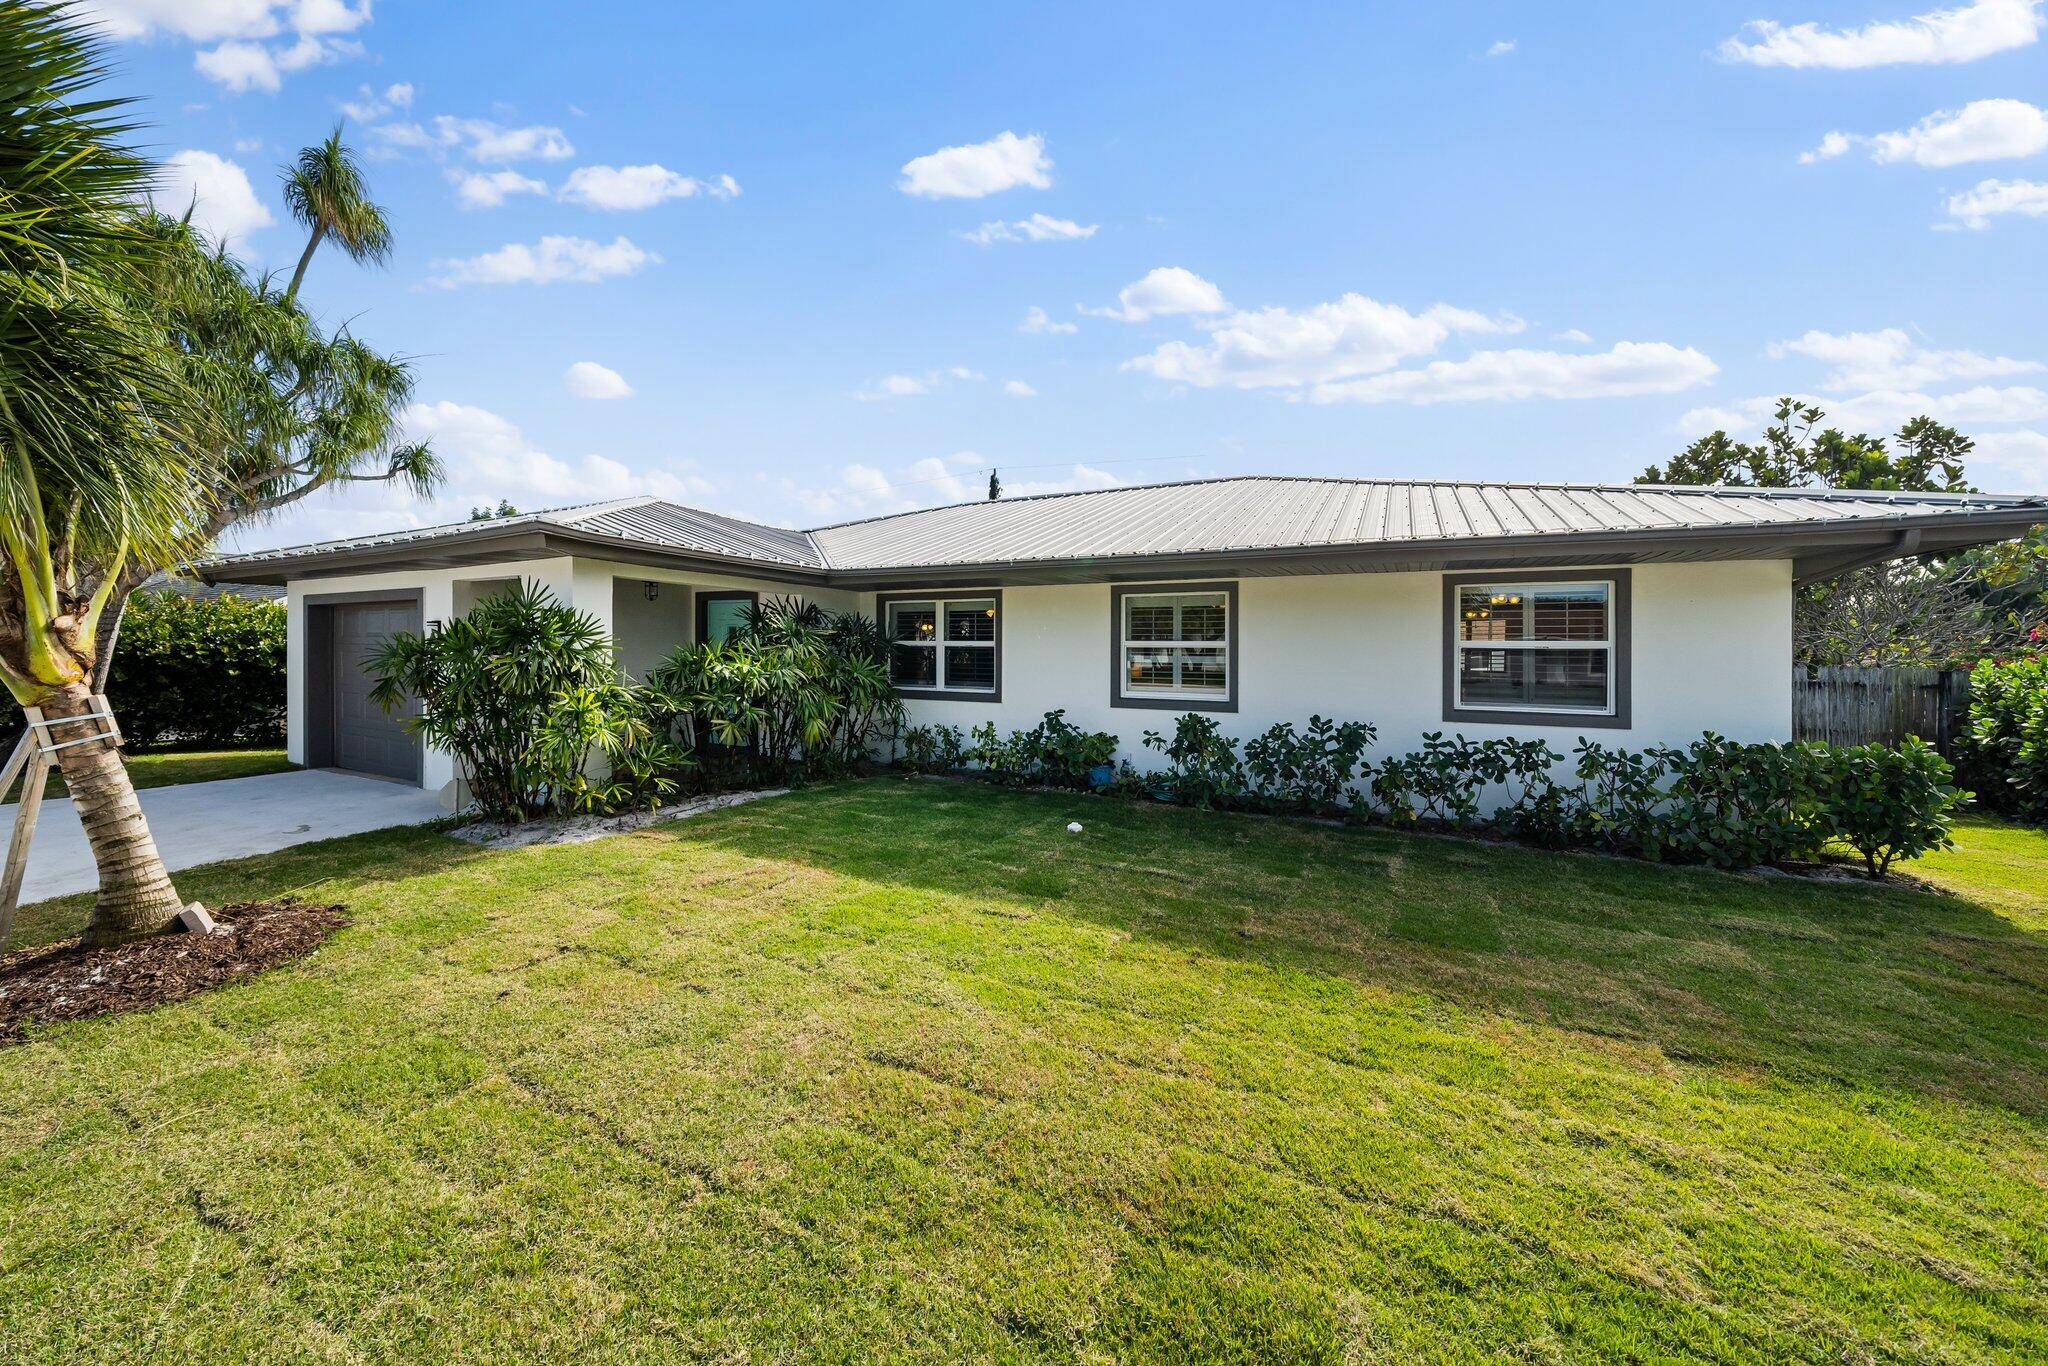 Charming, updated single family home in the heart of Jupiter Tequesta.